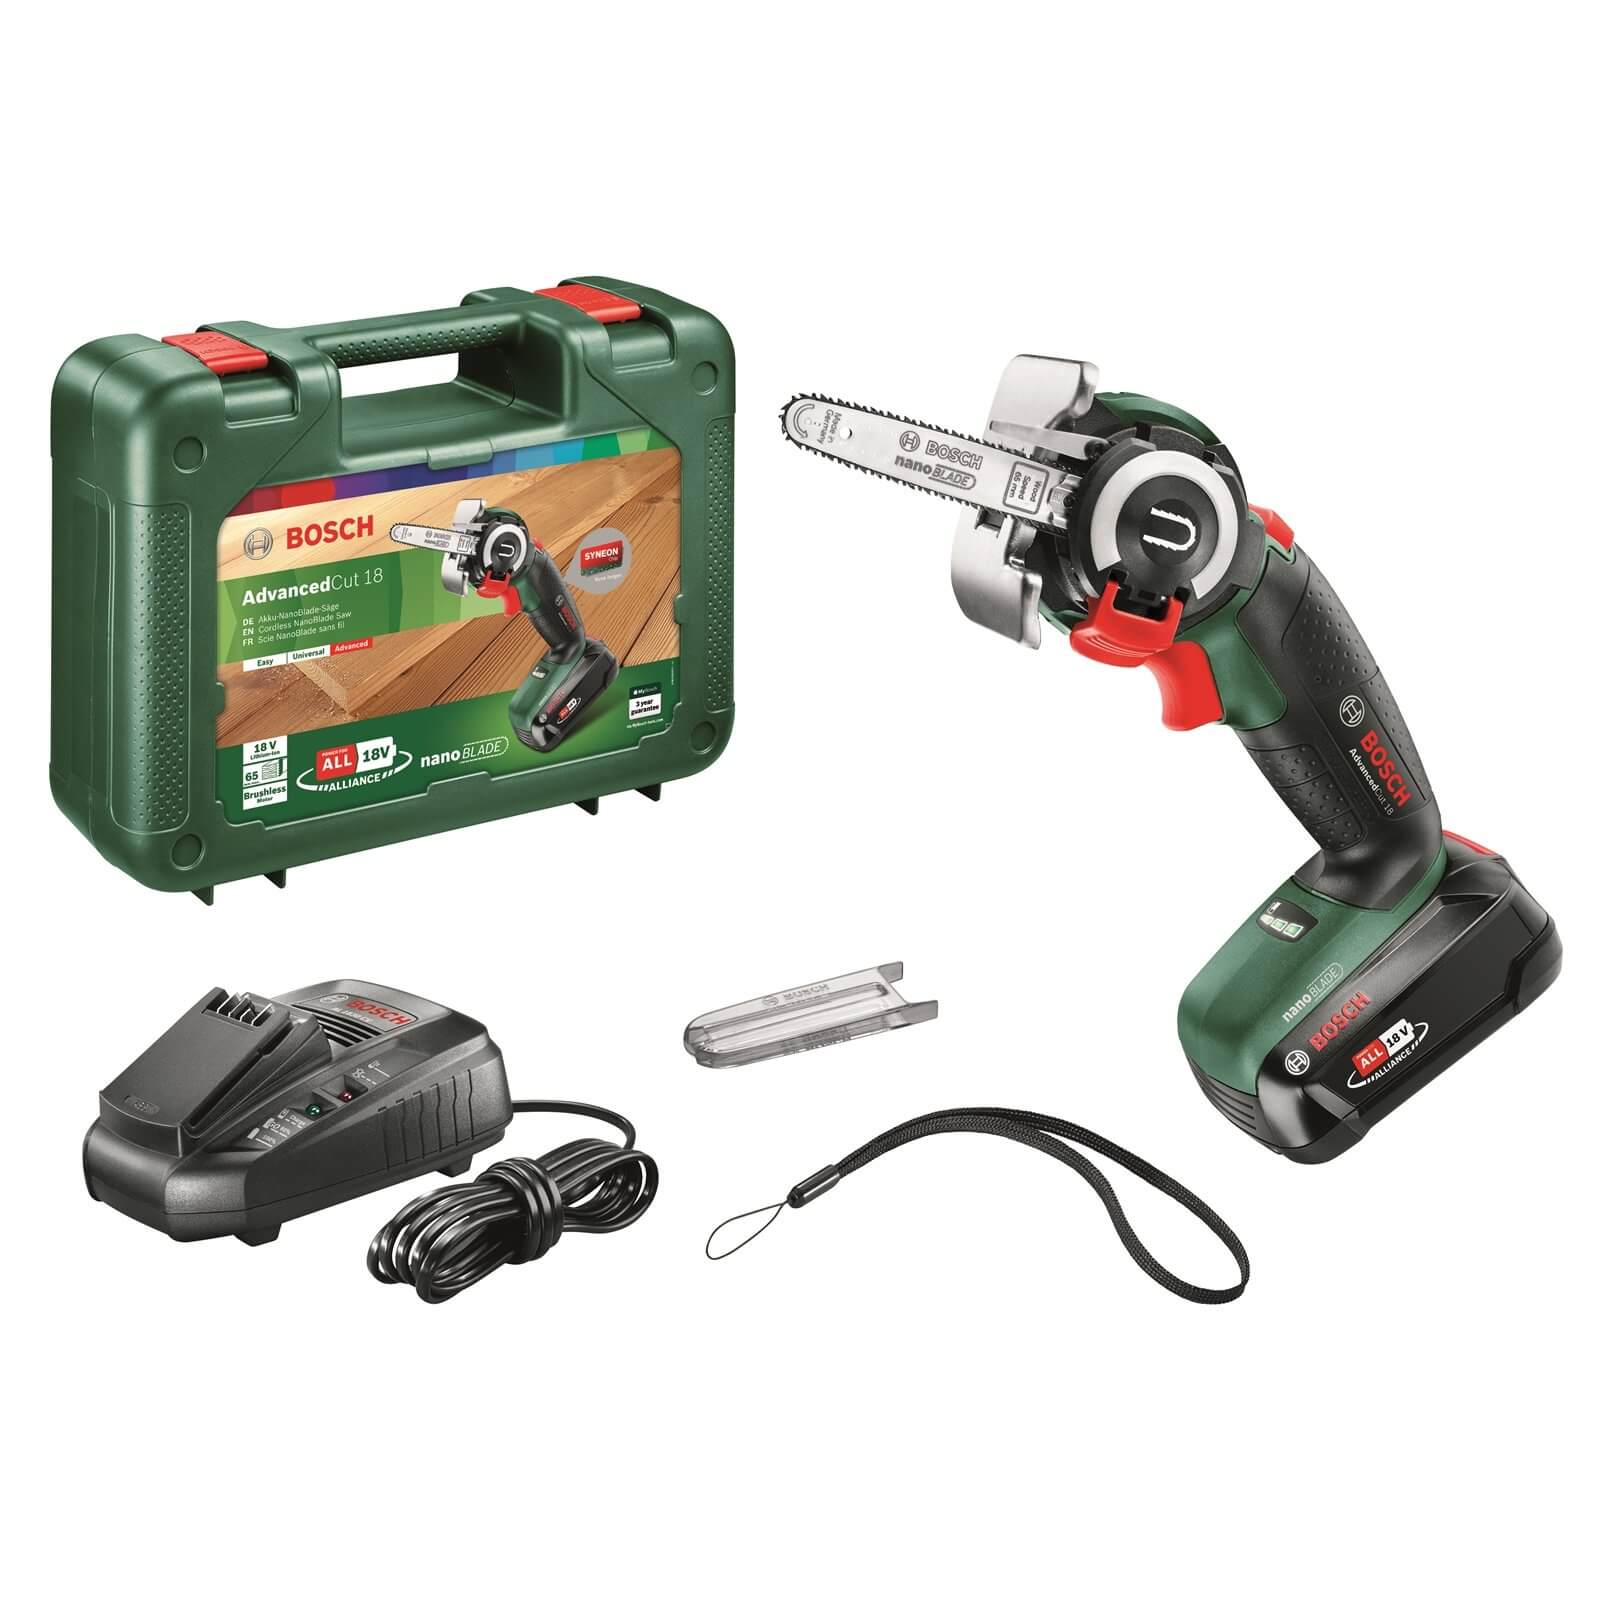 Photo of Bosch Advancedcut 18 Cordless Specialised Saw